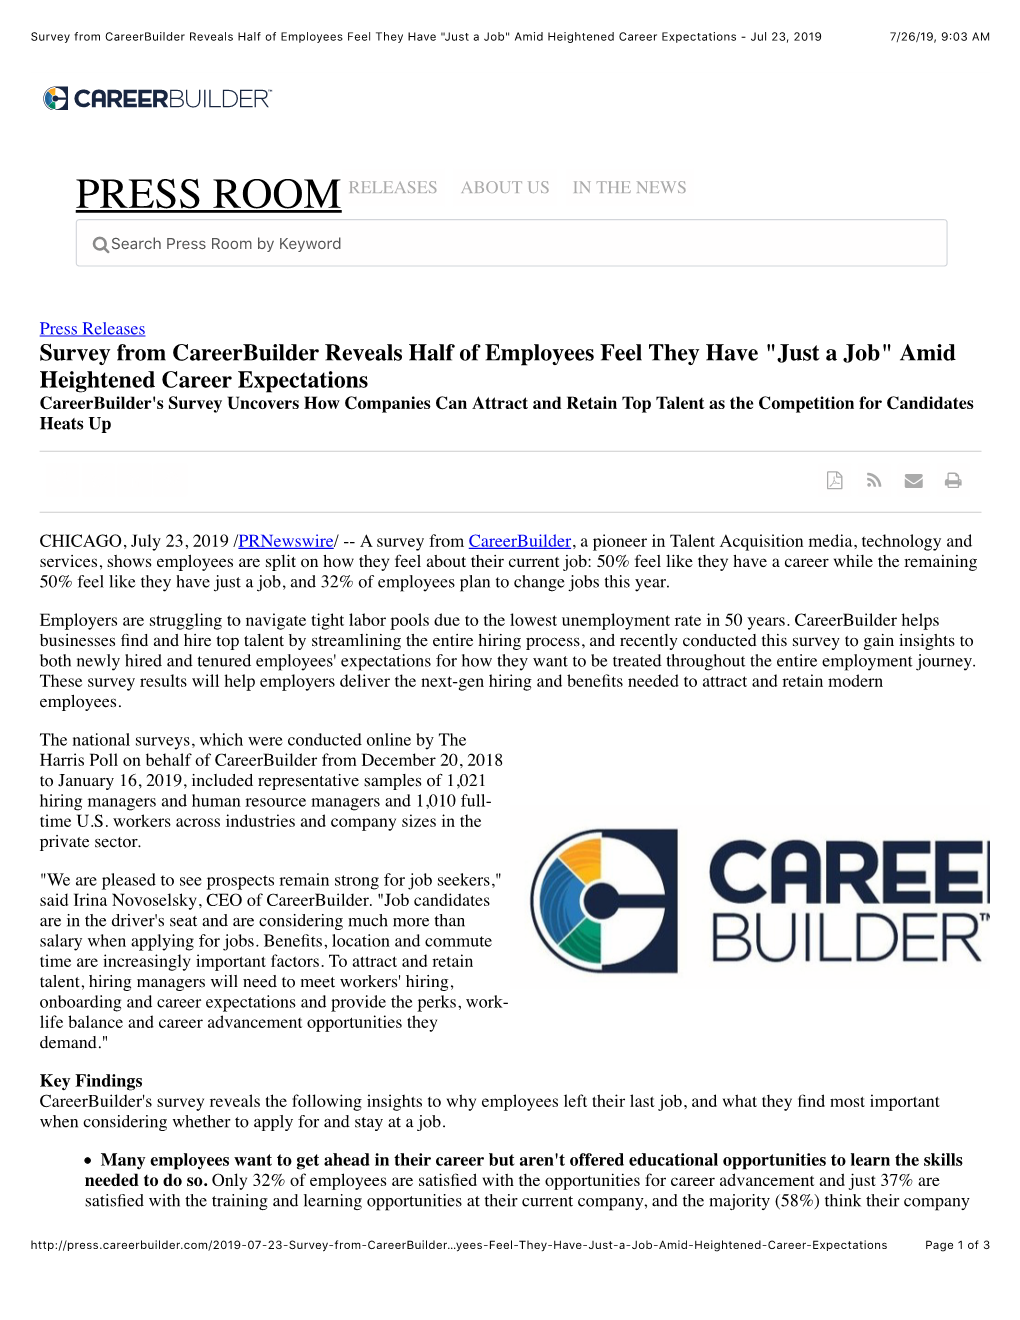 Survey from Careerbuilder Reveals Half of Employees Feel They Have "Just a Job" Amid Heightened Career Expectations - Jul 23, 2019 7/26/19, 9:03 AM